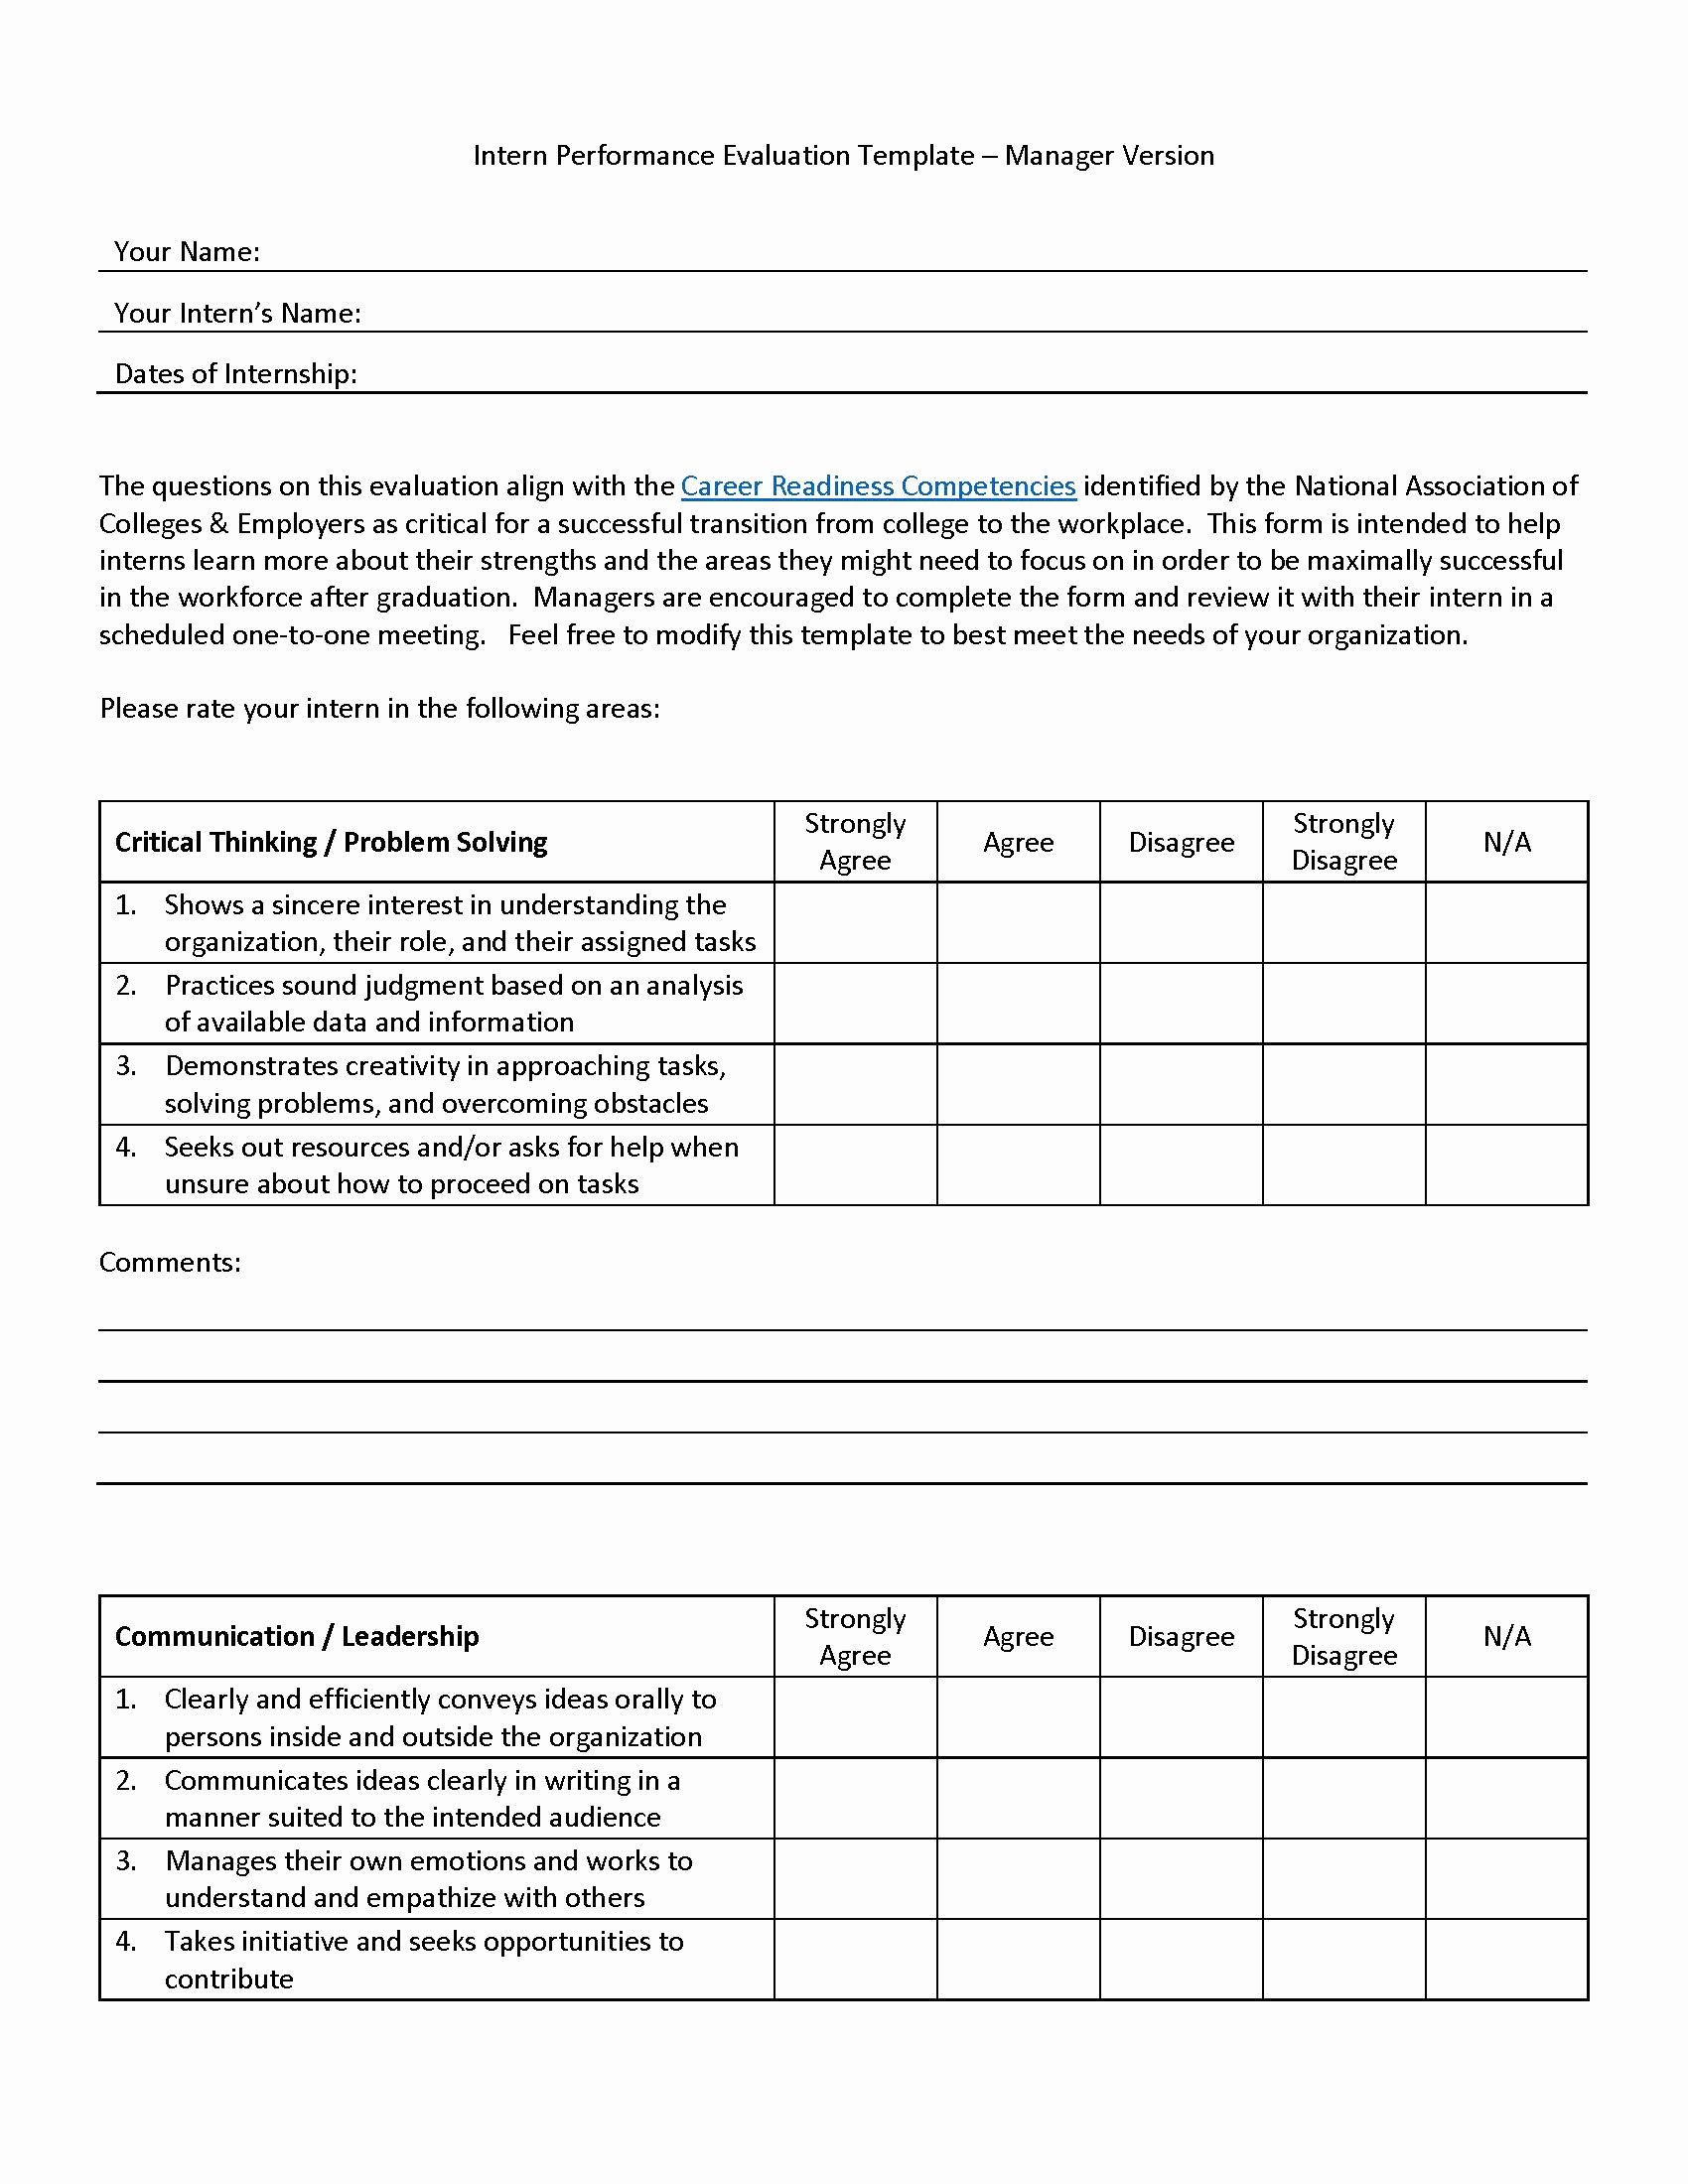 Performance Review Template for Managers Luxury Intern Performance Evaluation Template – Manager Version